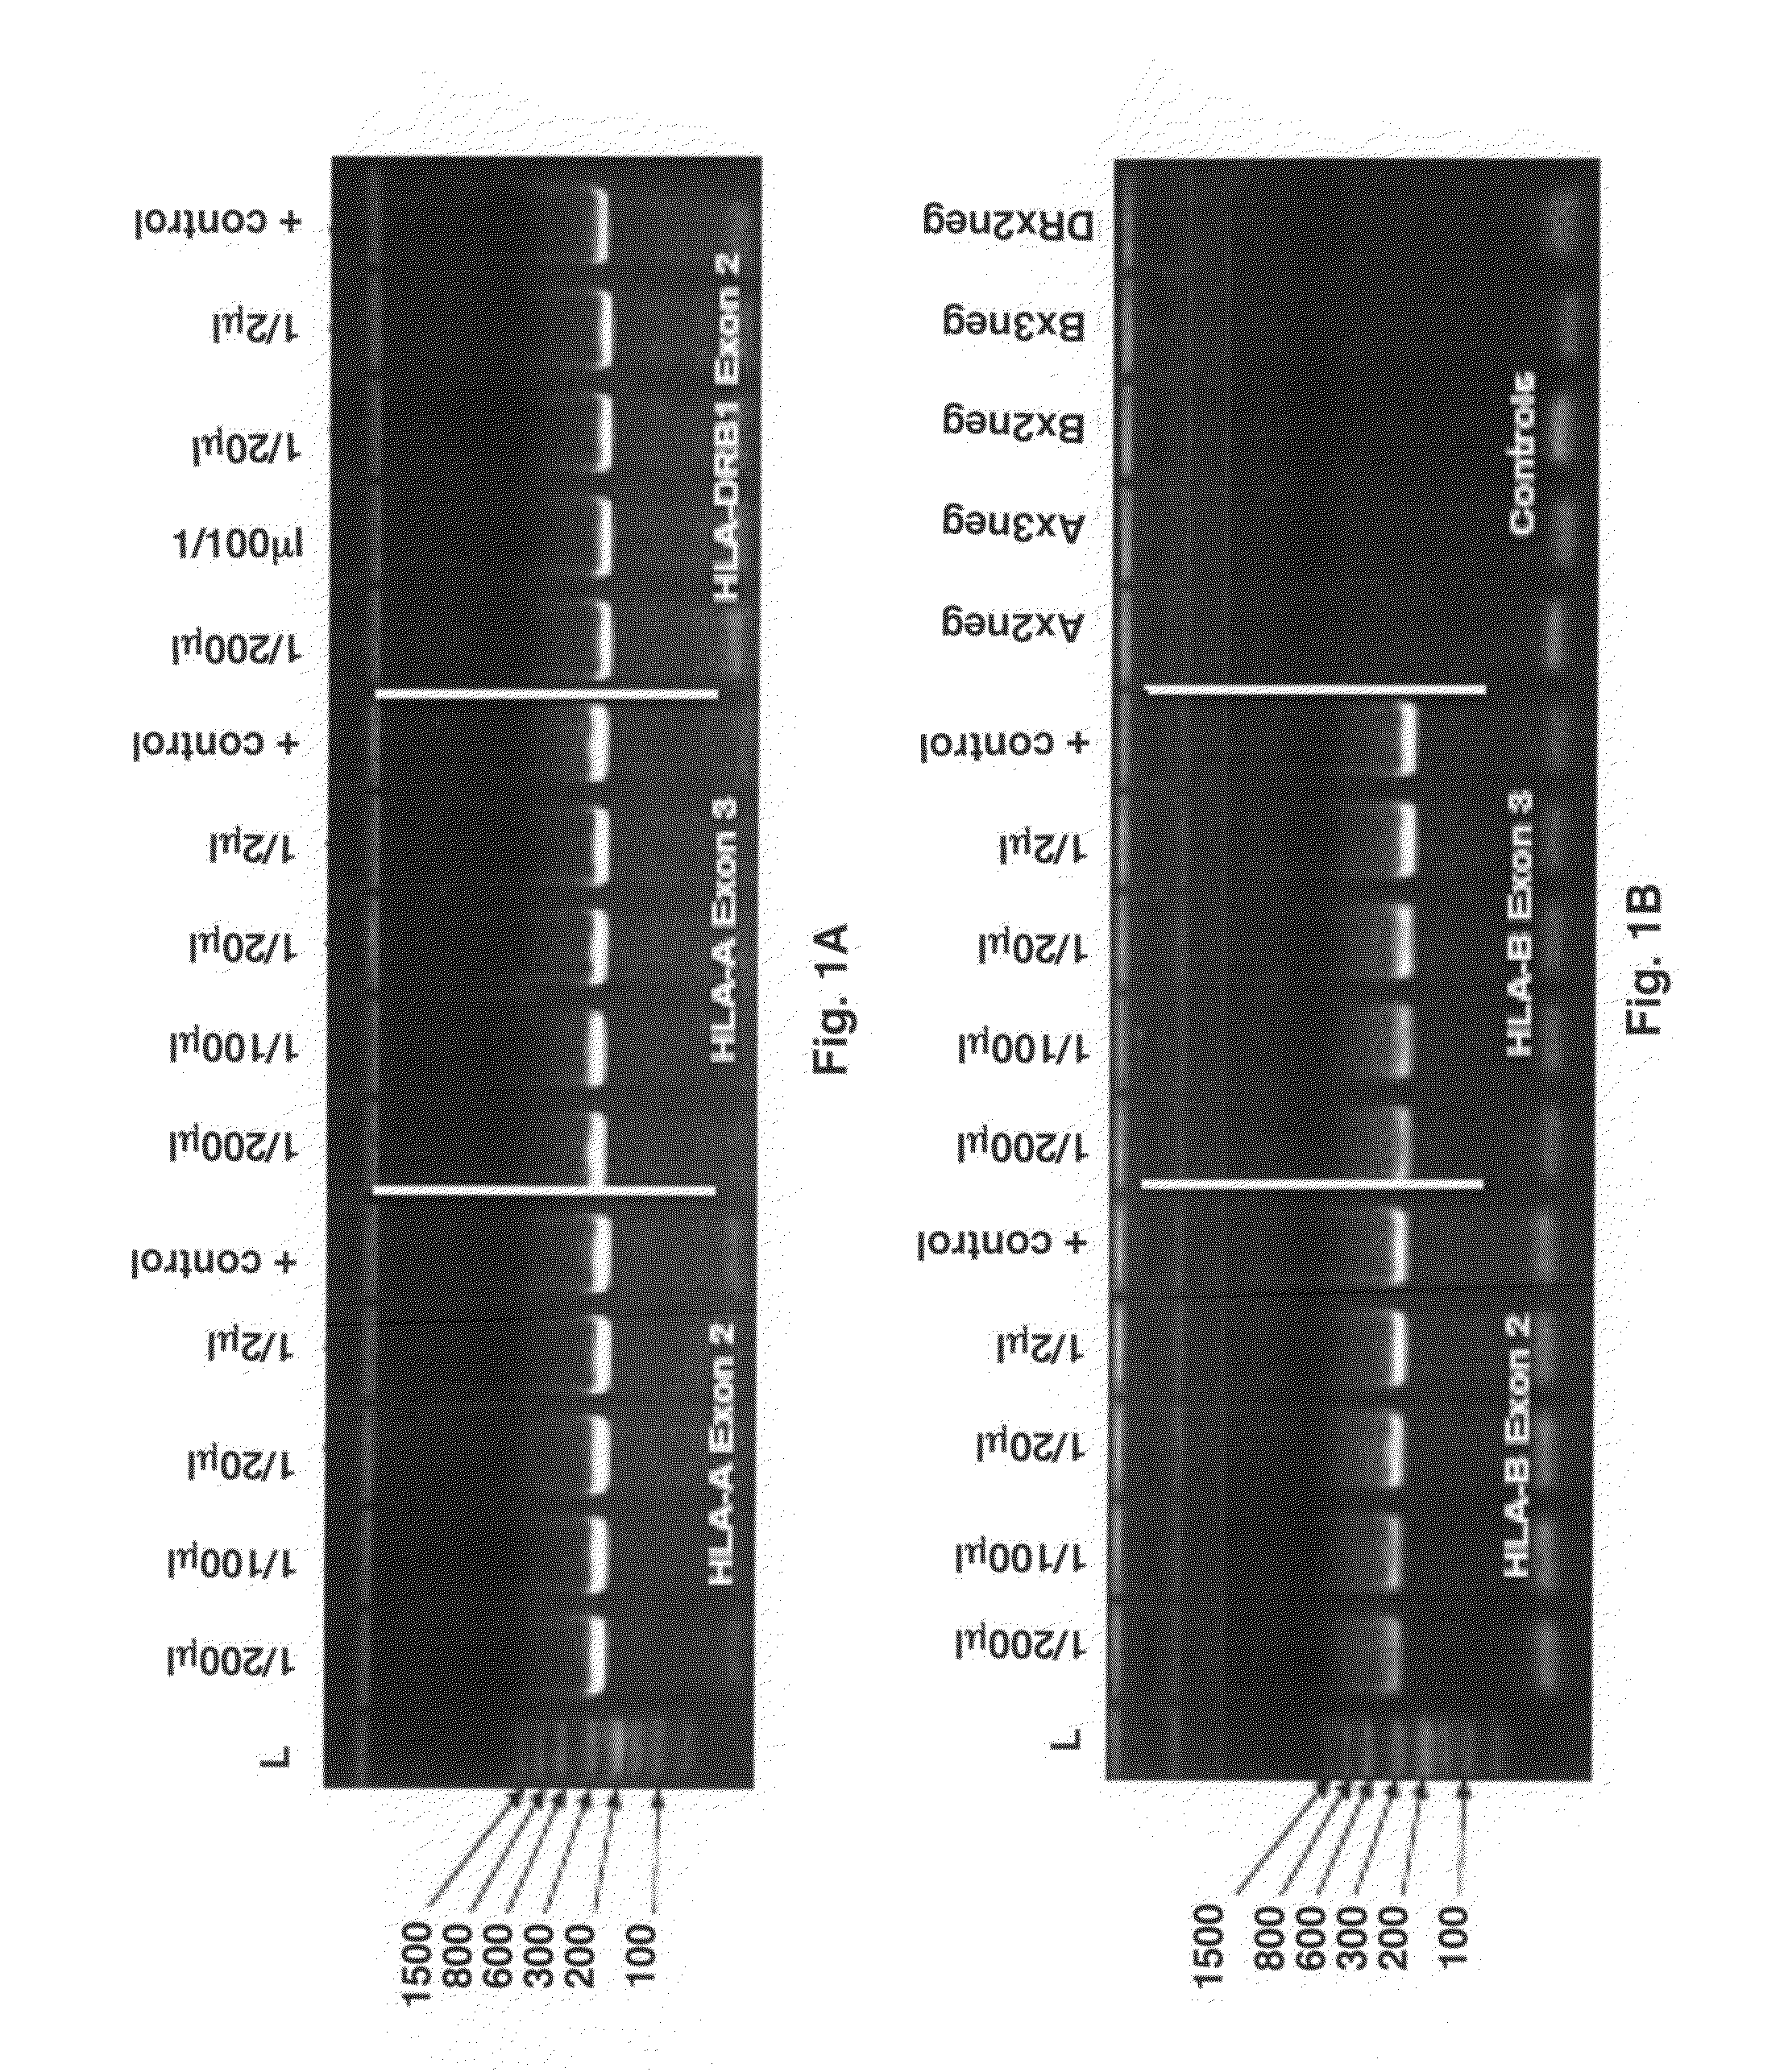 Methods for PCR and HLA typing using raw blood